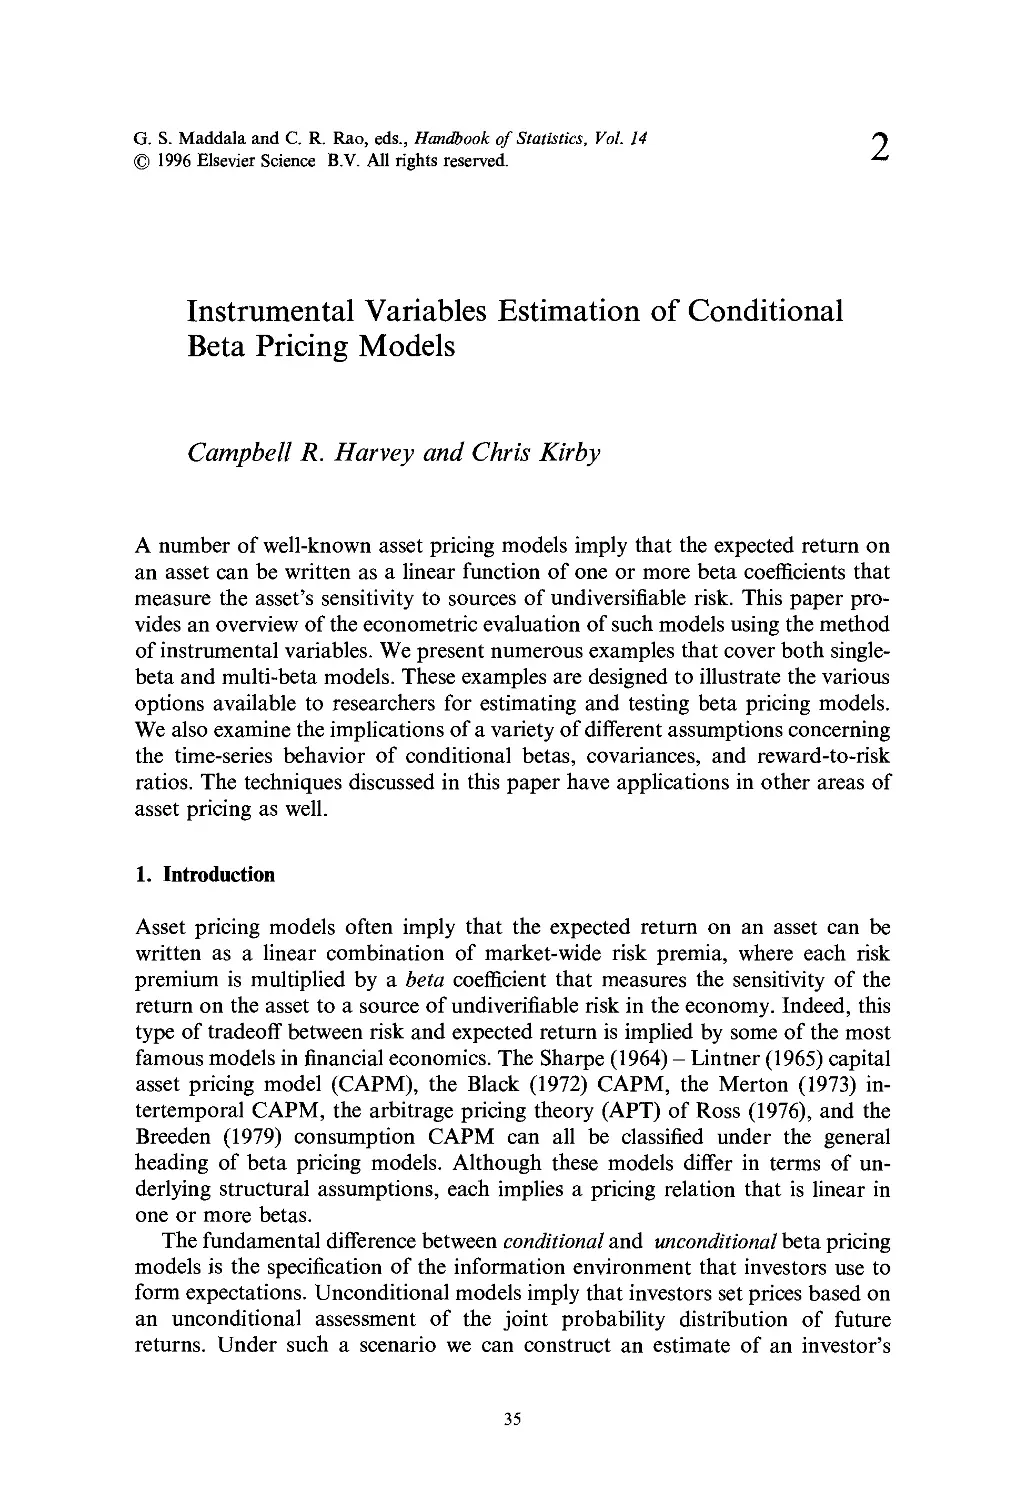 2. Instrumental Variables Estimation of Conditional Beta Pricing Models